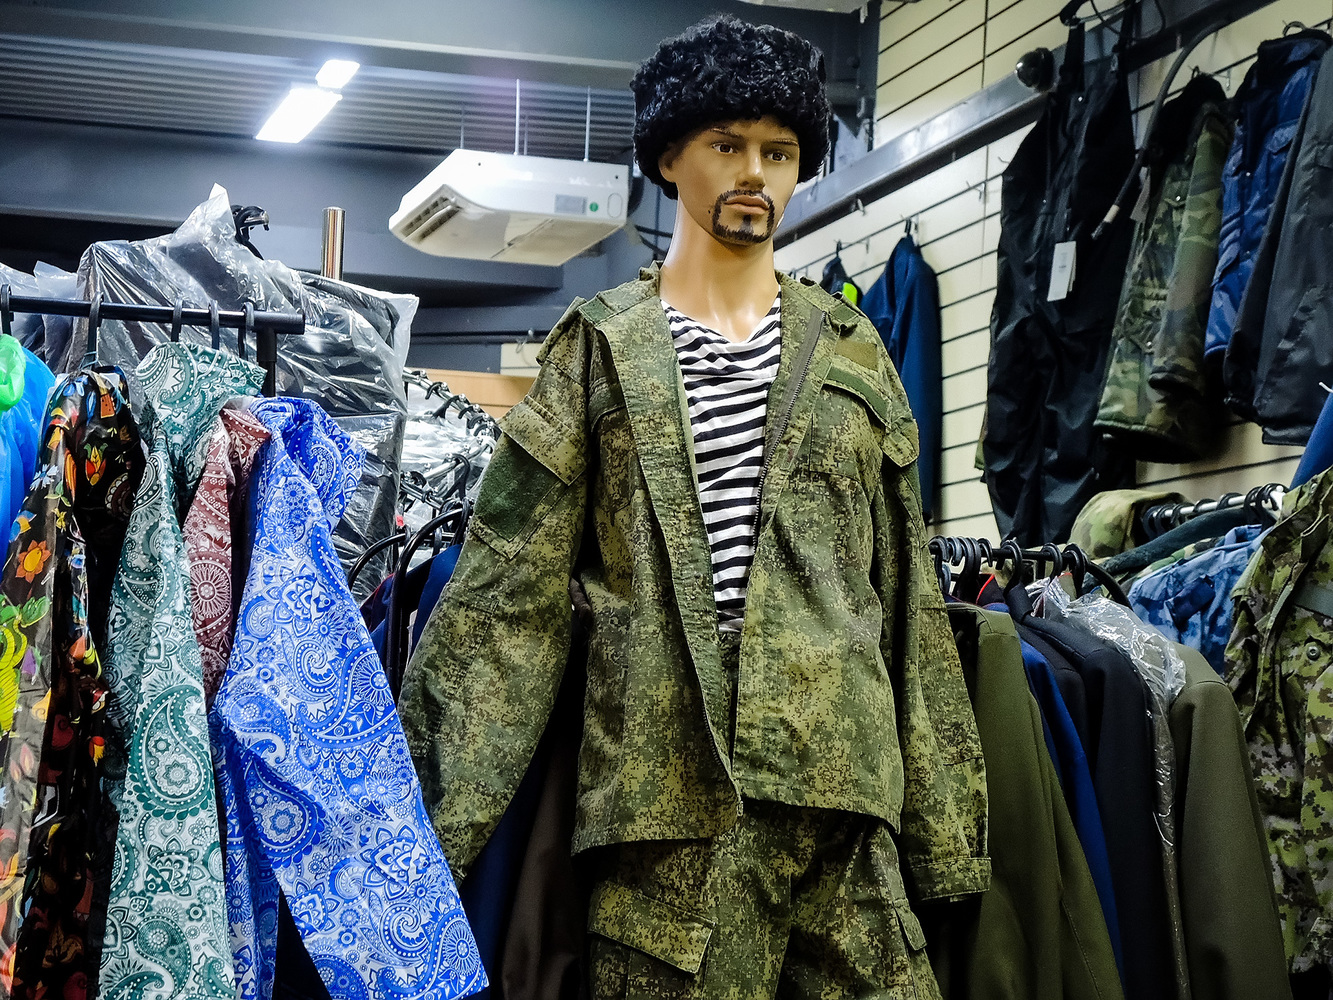 Prices have skyrocketed in military stores and workwear: shots from stores